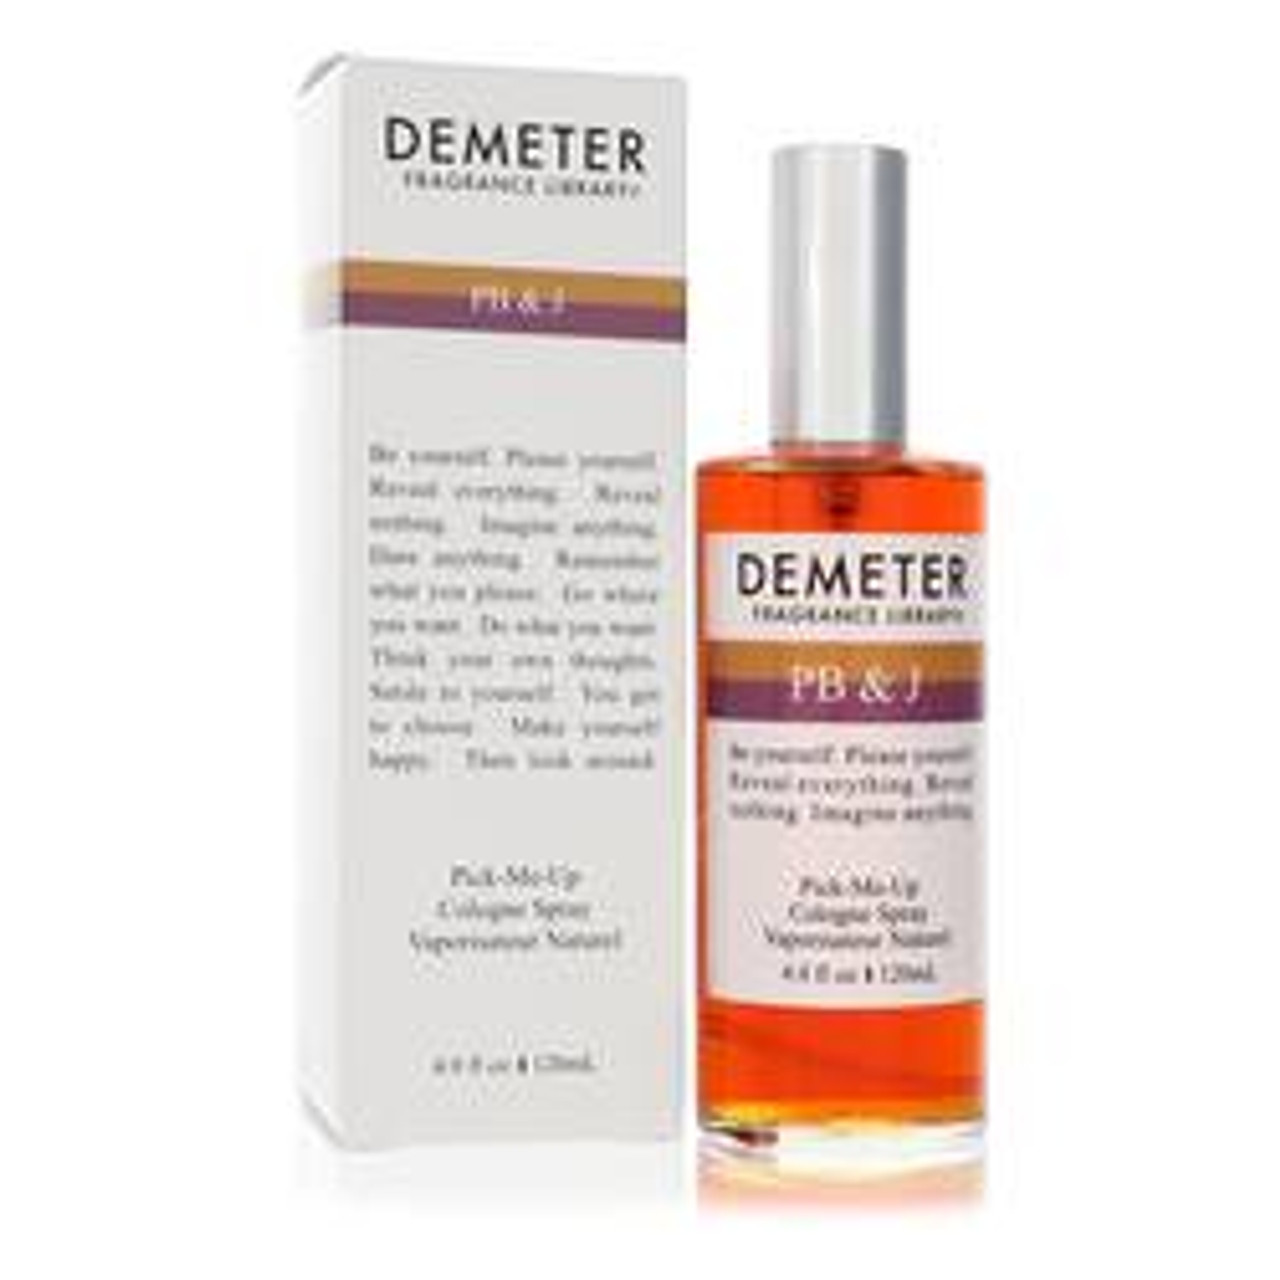 Demeter Pb & J Perfume By Demeter Cologne Spray (Unisex) 4 oz for Women - [From 79.50 - Choose pk Qty ] - *Ships from Miami